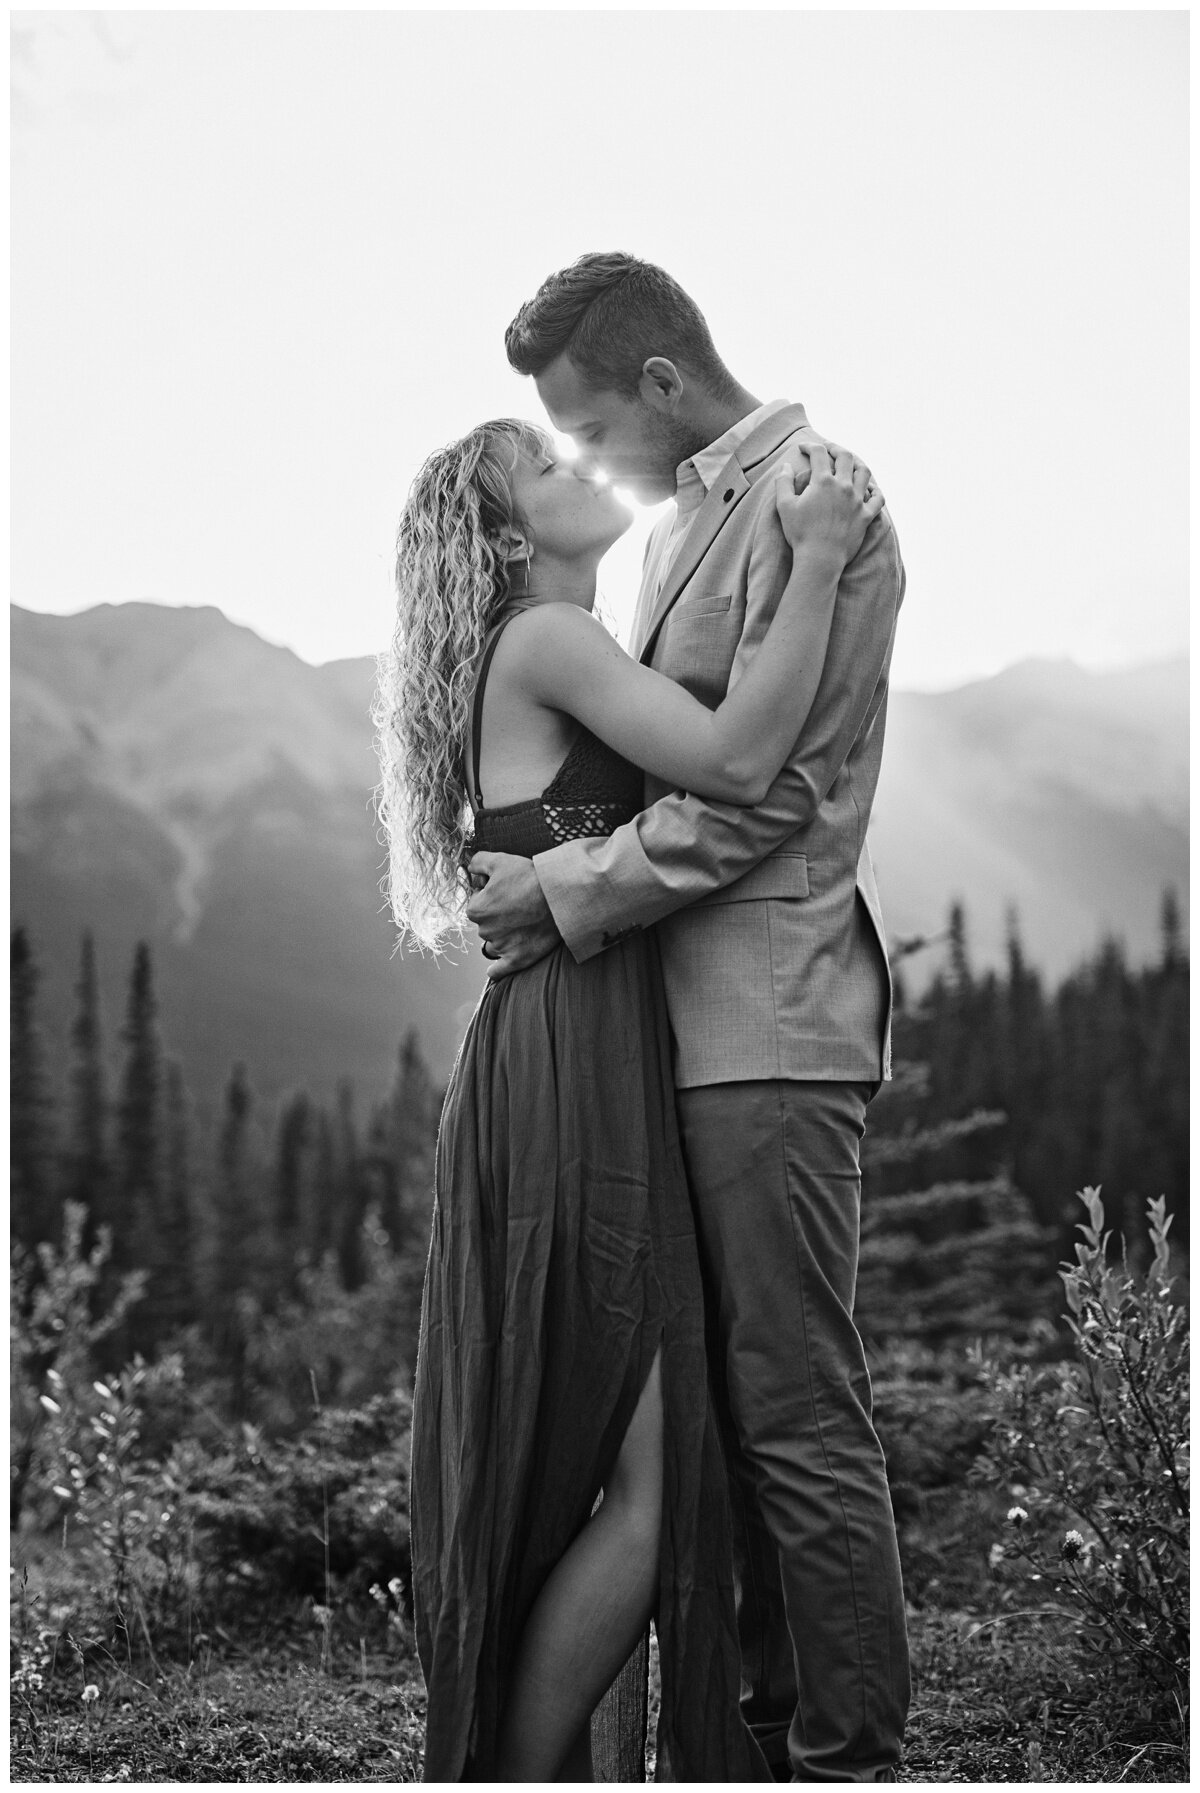 Destination Photographer | Canmore Photography